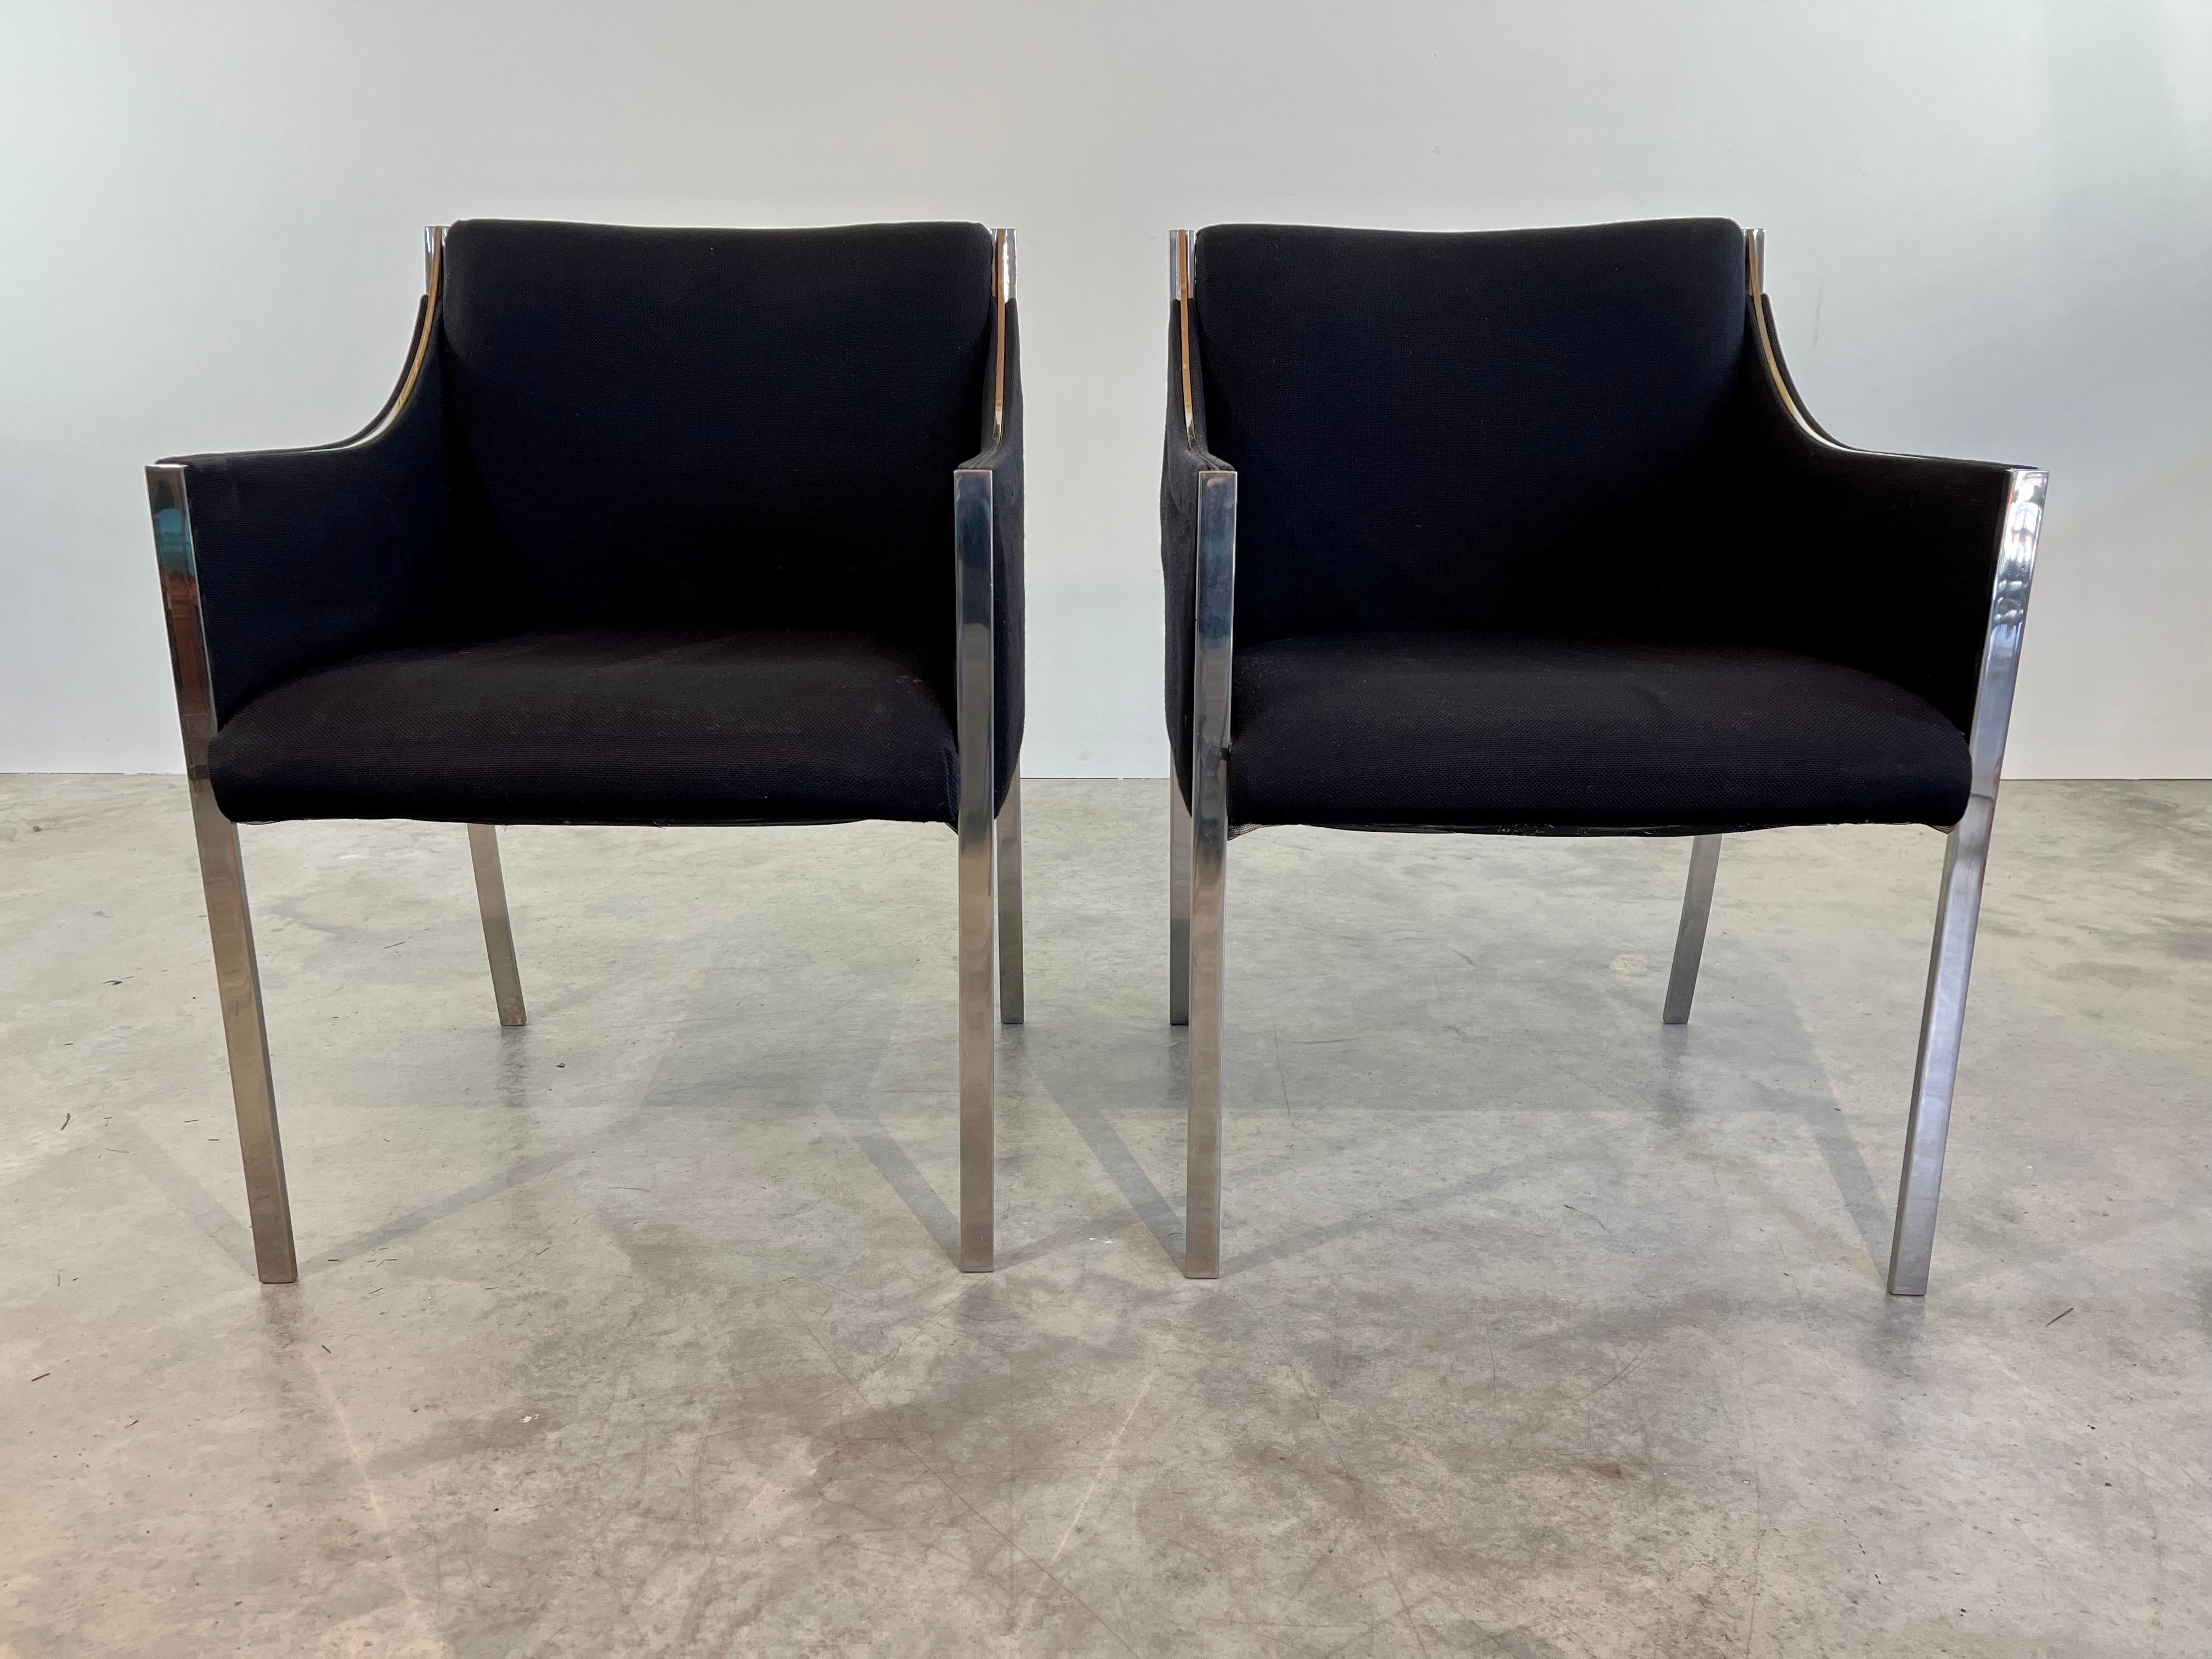 Mid-Century Modern Scarce Pair of Jens Risom Sculptural Chromed Steel Lounge Chairs For Sale